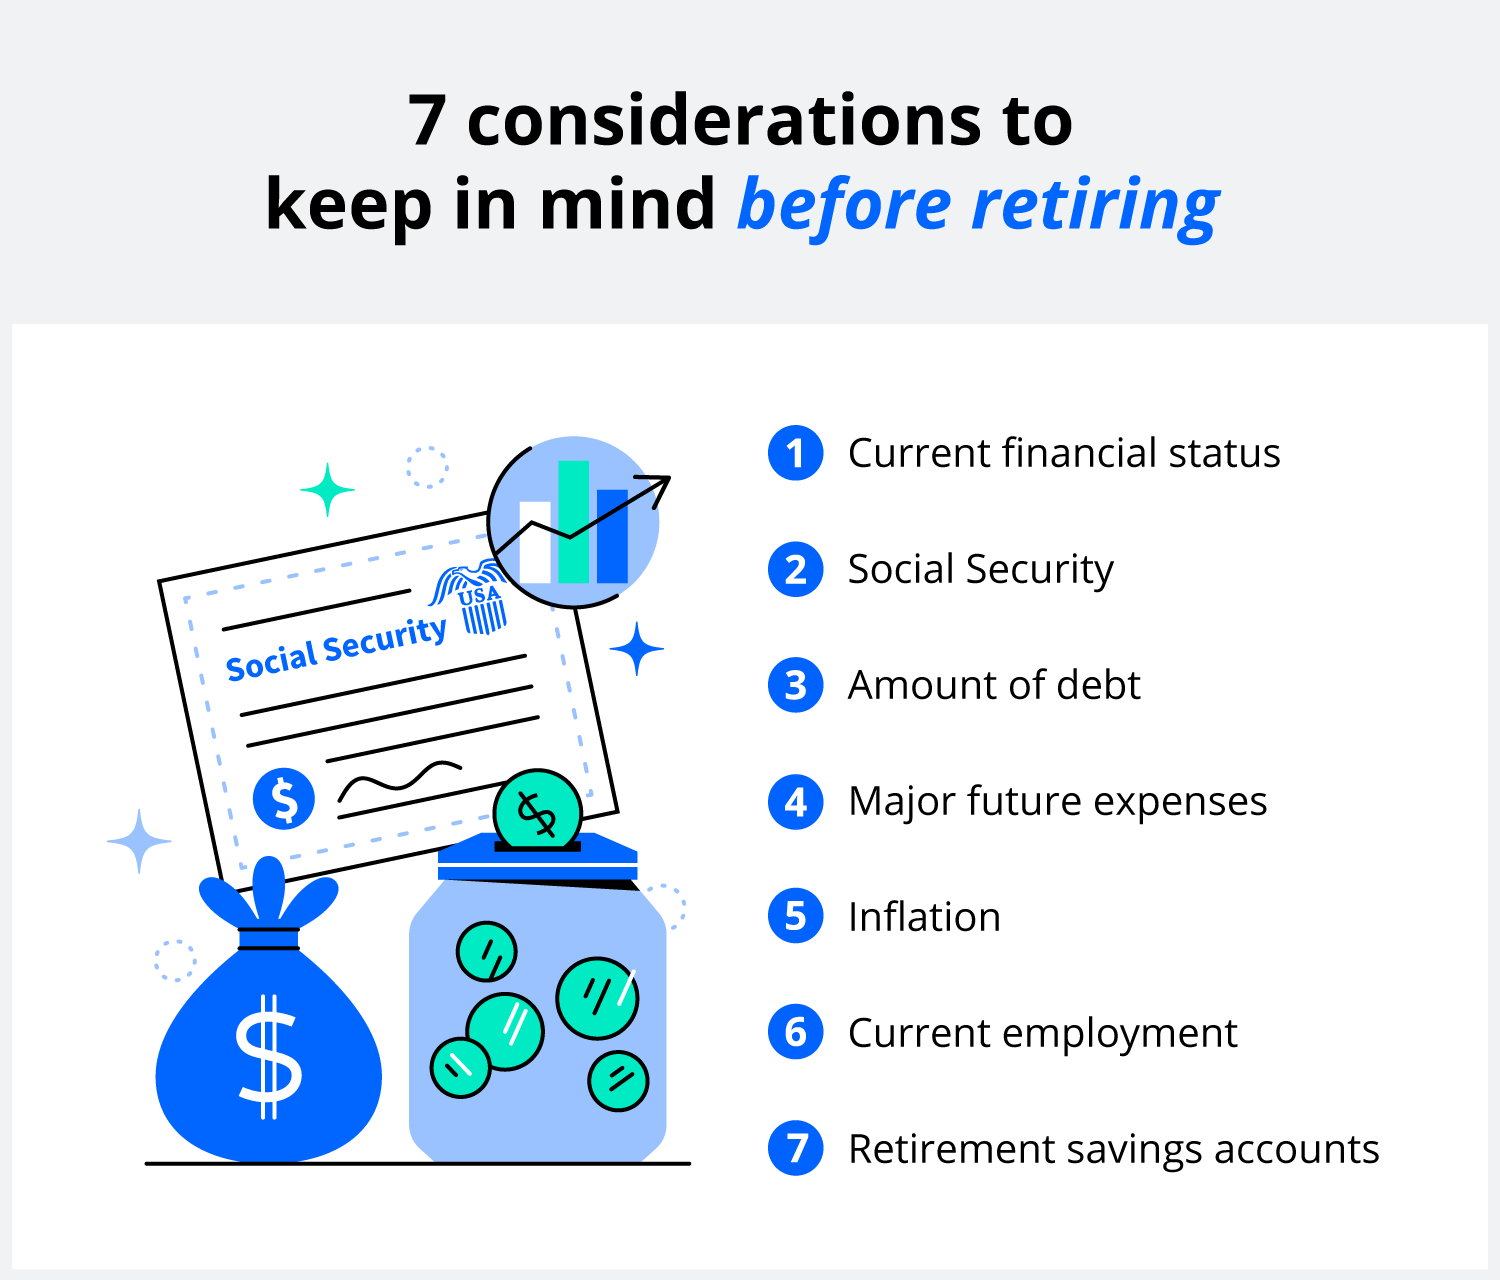 Before retiring, consider your financial status, social security benefits, debt, future expenses, the impact of inflation, your current employment, and your retirement savings account. 